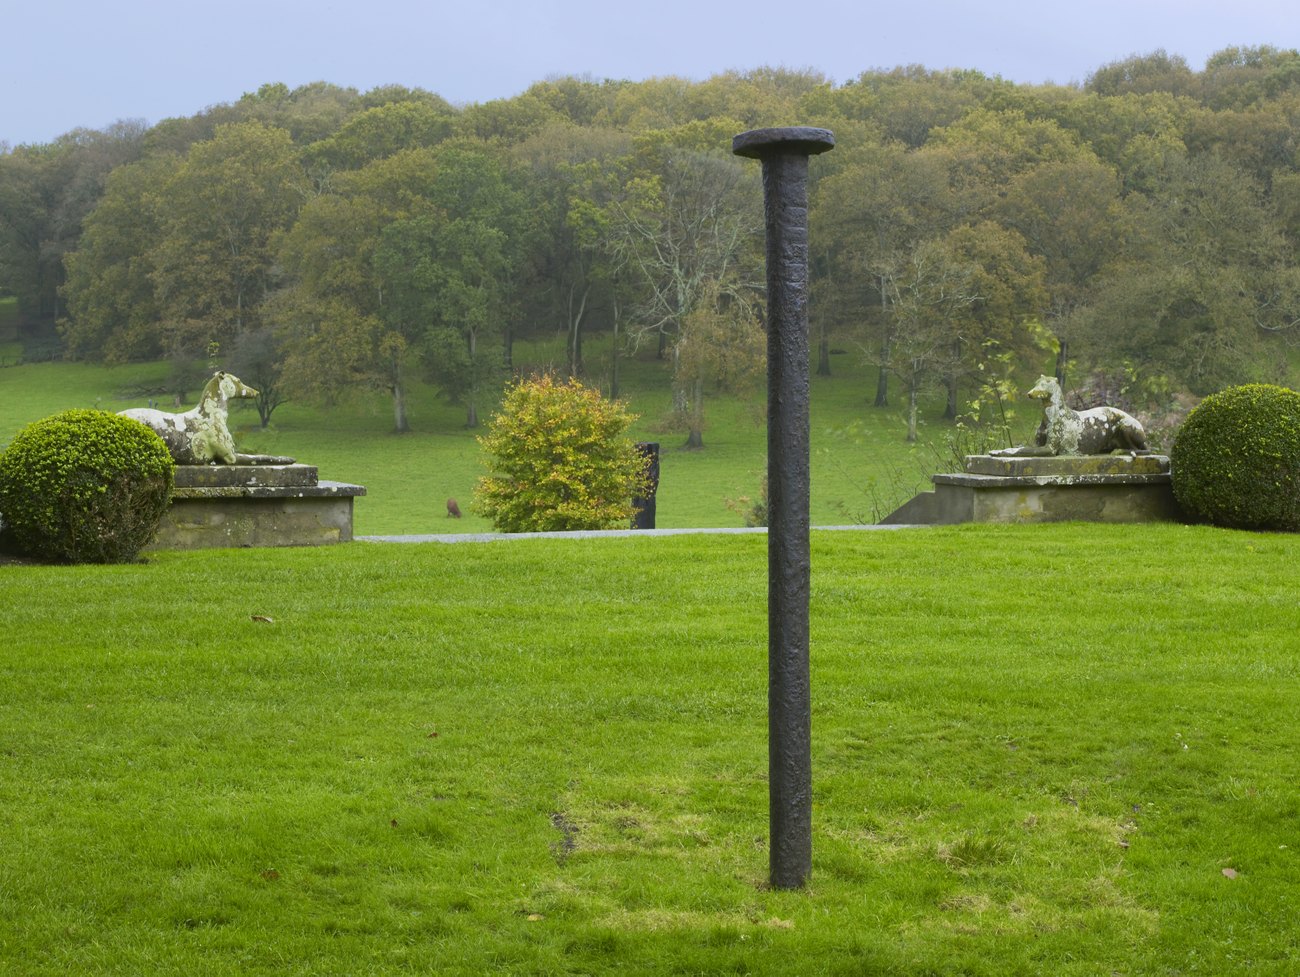 A large black sculpture of a nail stood upright in a grassy garden